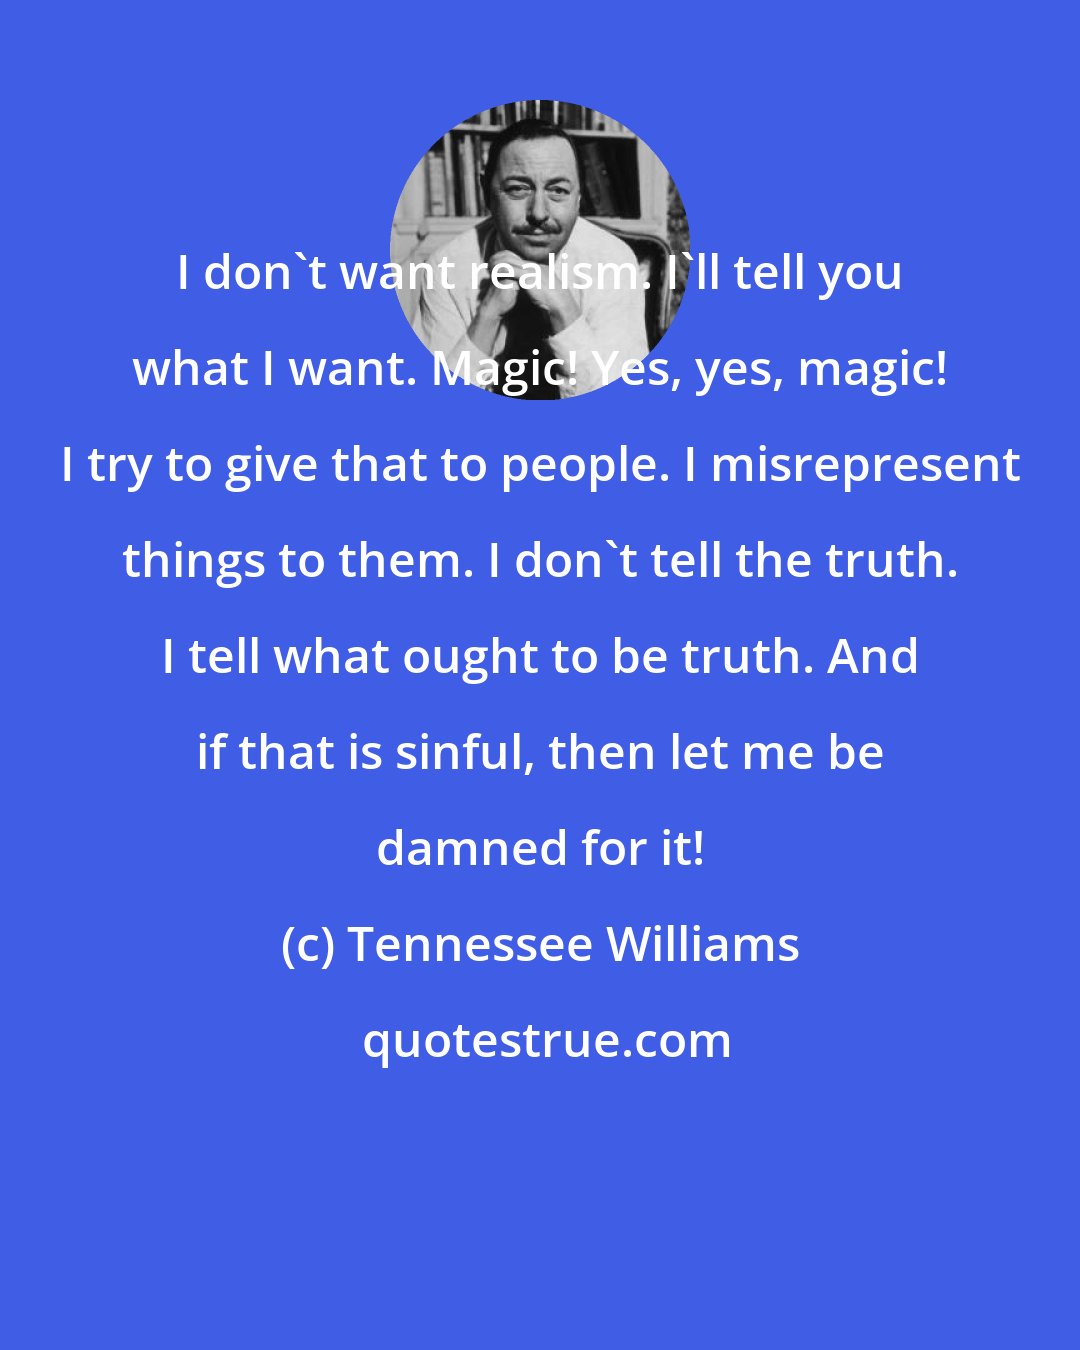 Tennessee Williams: I don't want realism. I'll tell you what I want. Magic! Yes, yes, magic! I try to give that to people. I misrepresent things to them. I don't tell the truth. I tell what ought to be truth. And if that is sinful, then let me be damned for it!